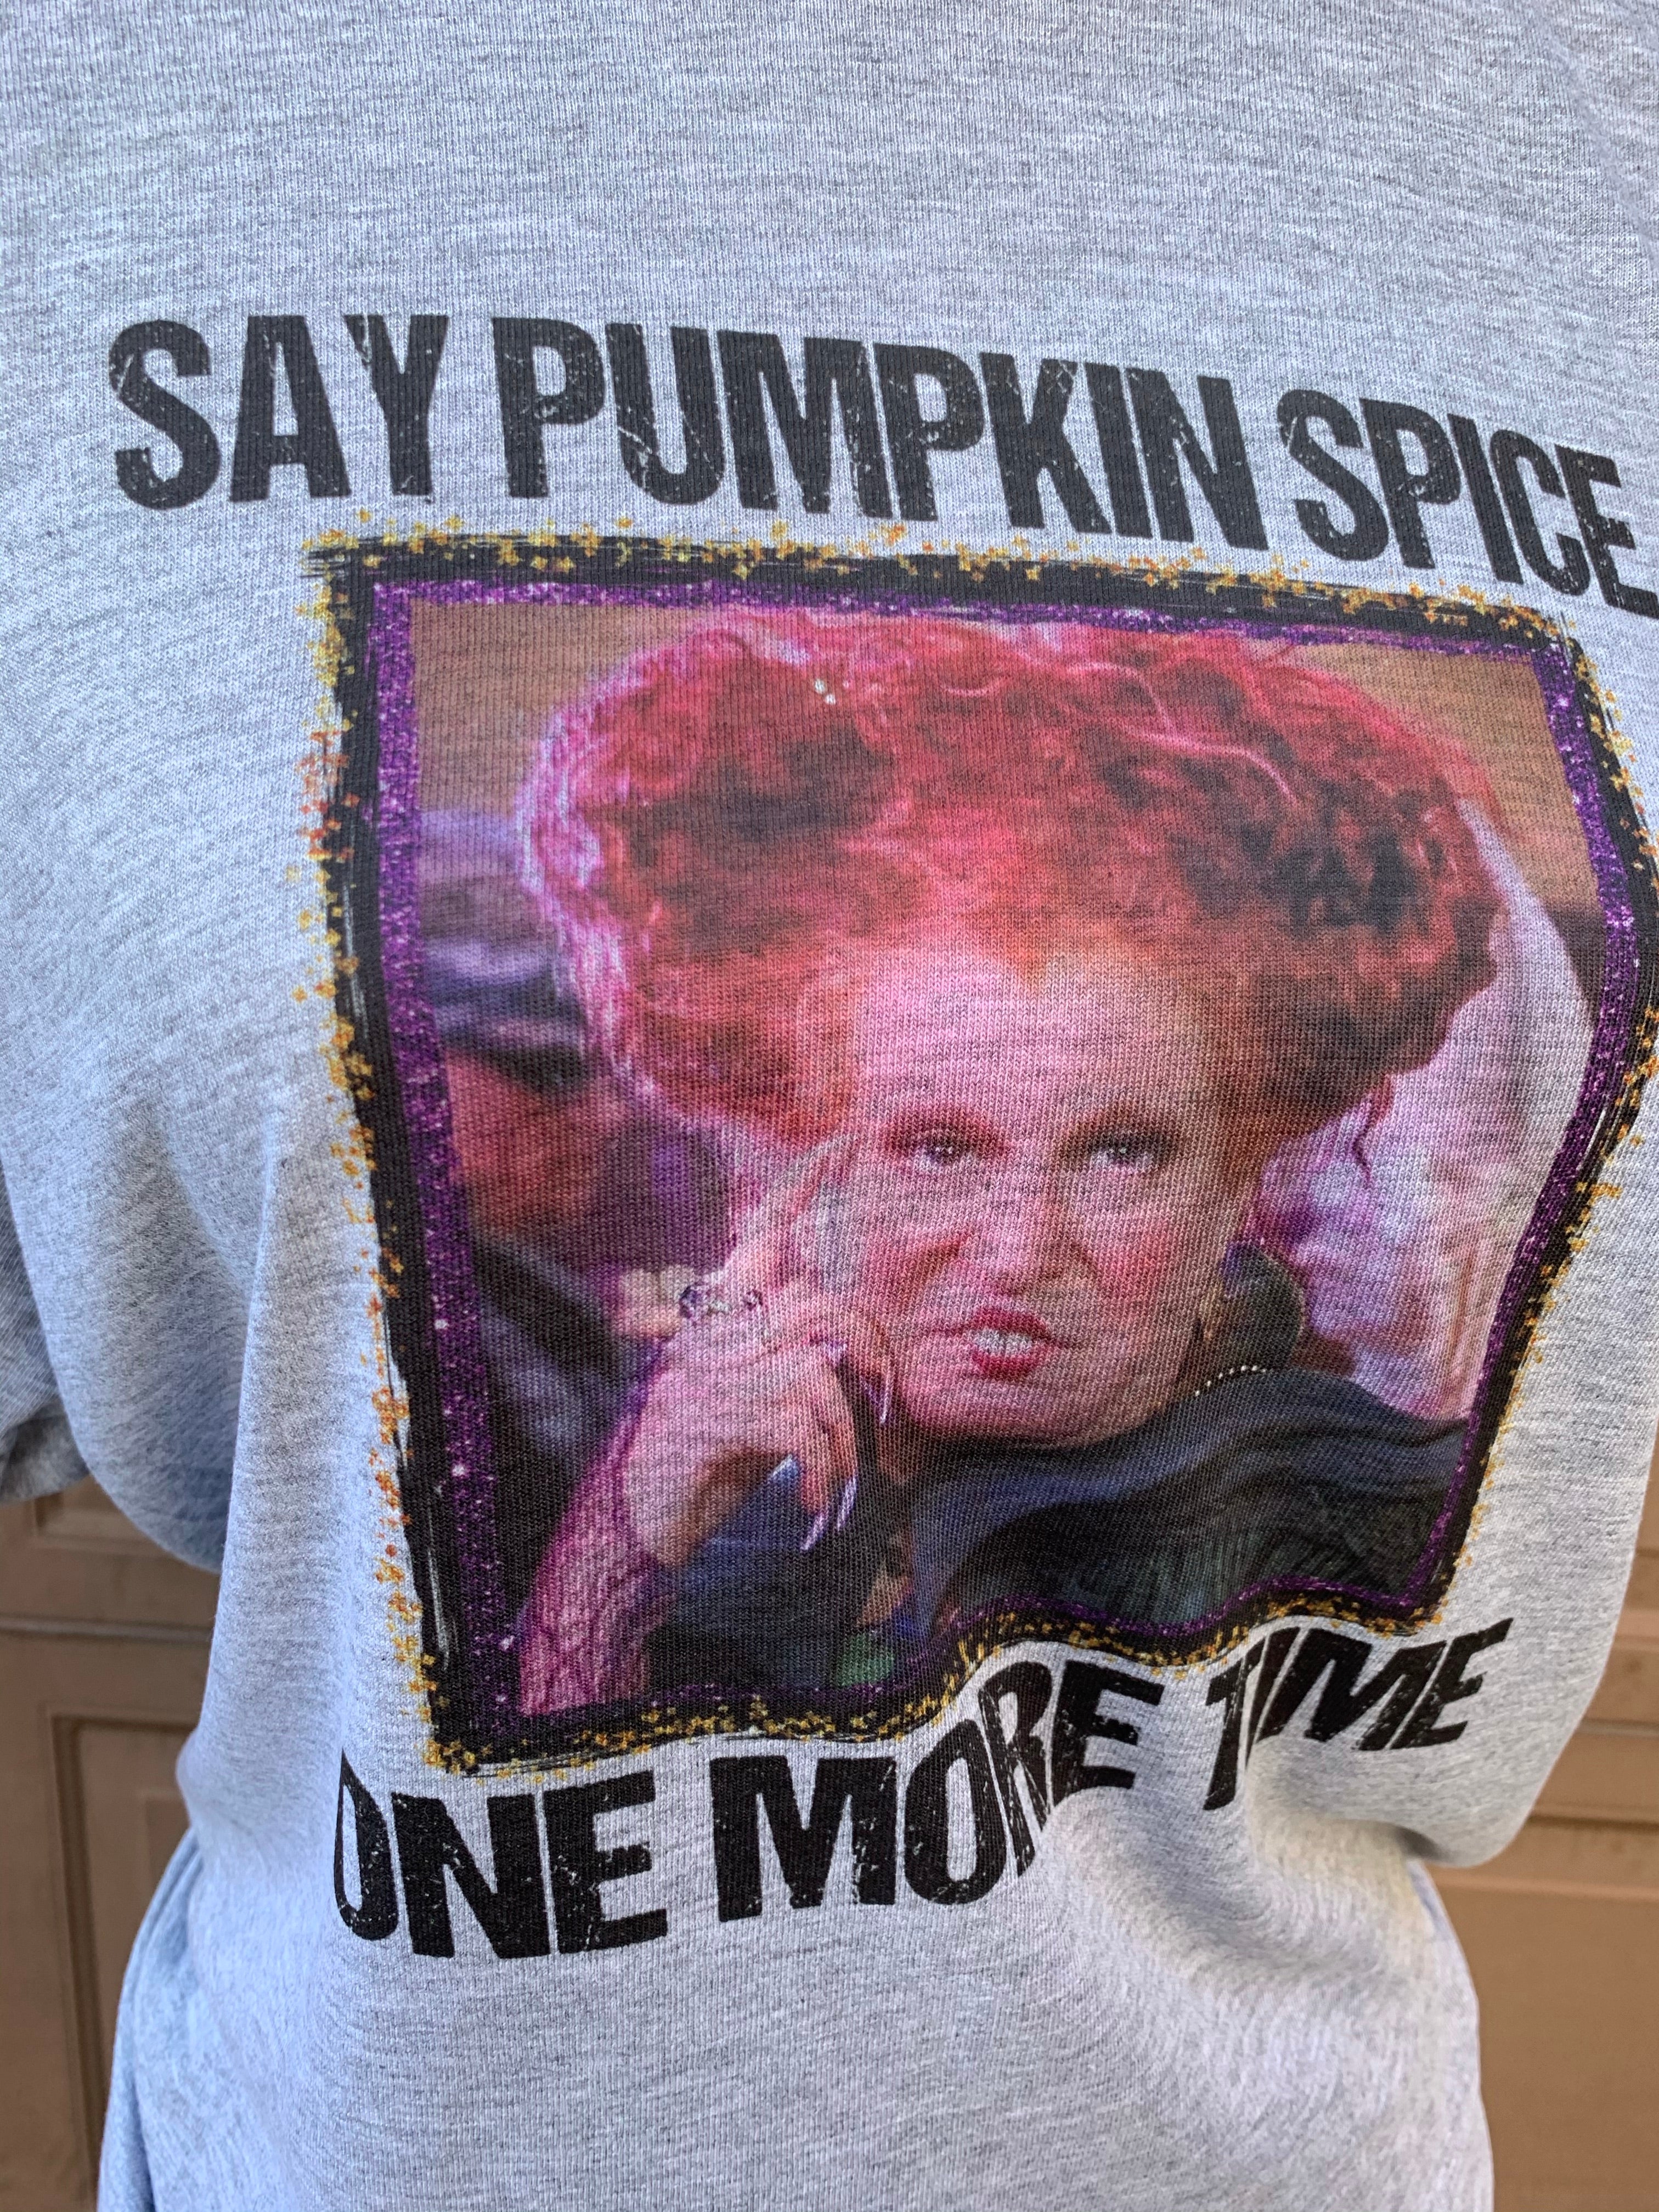 Say Pumpkin Spice One More Time Sublimation T-Shirt